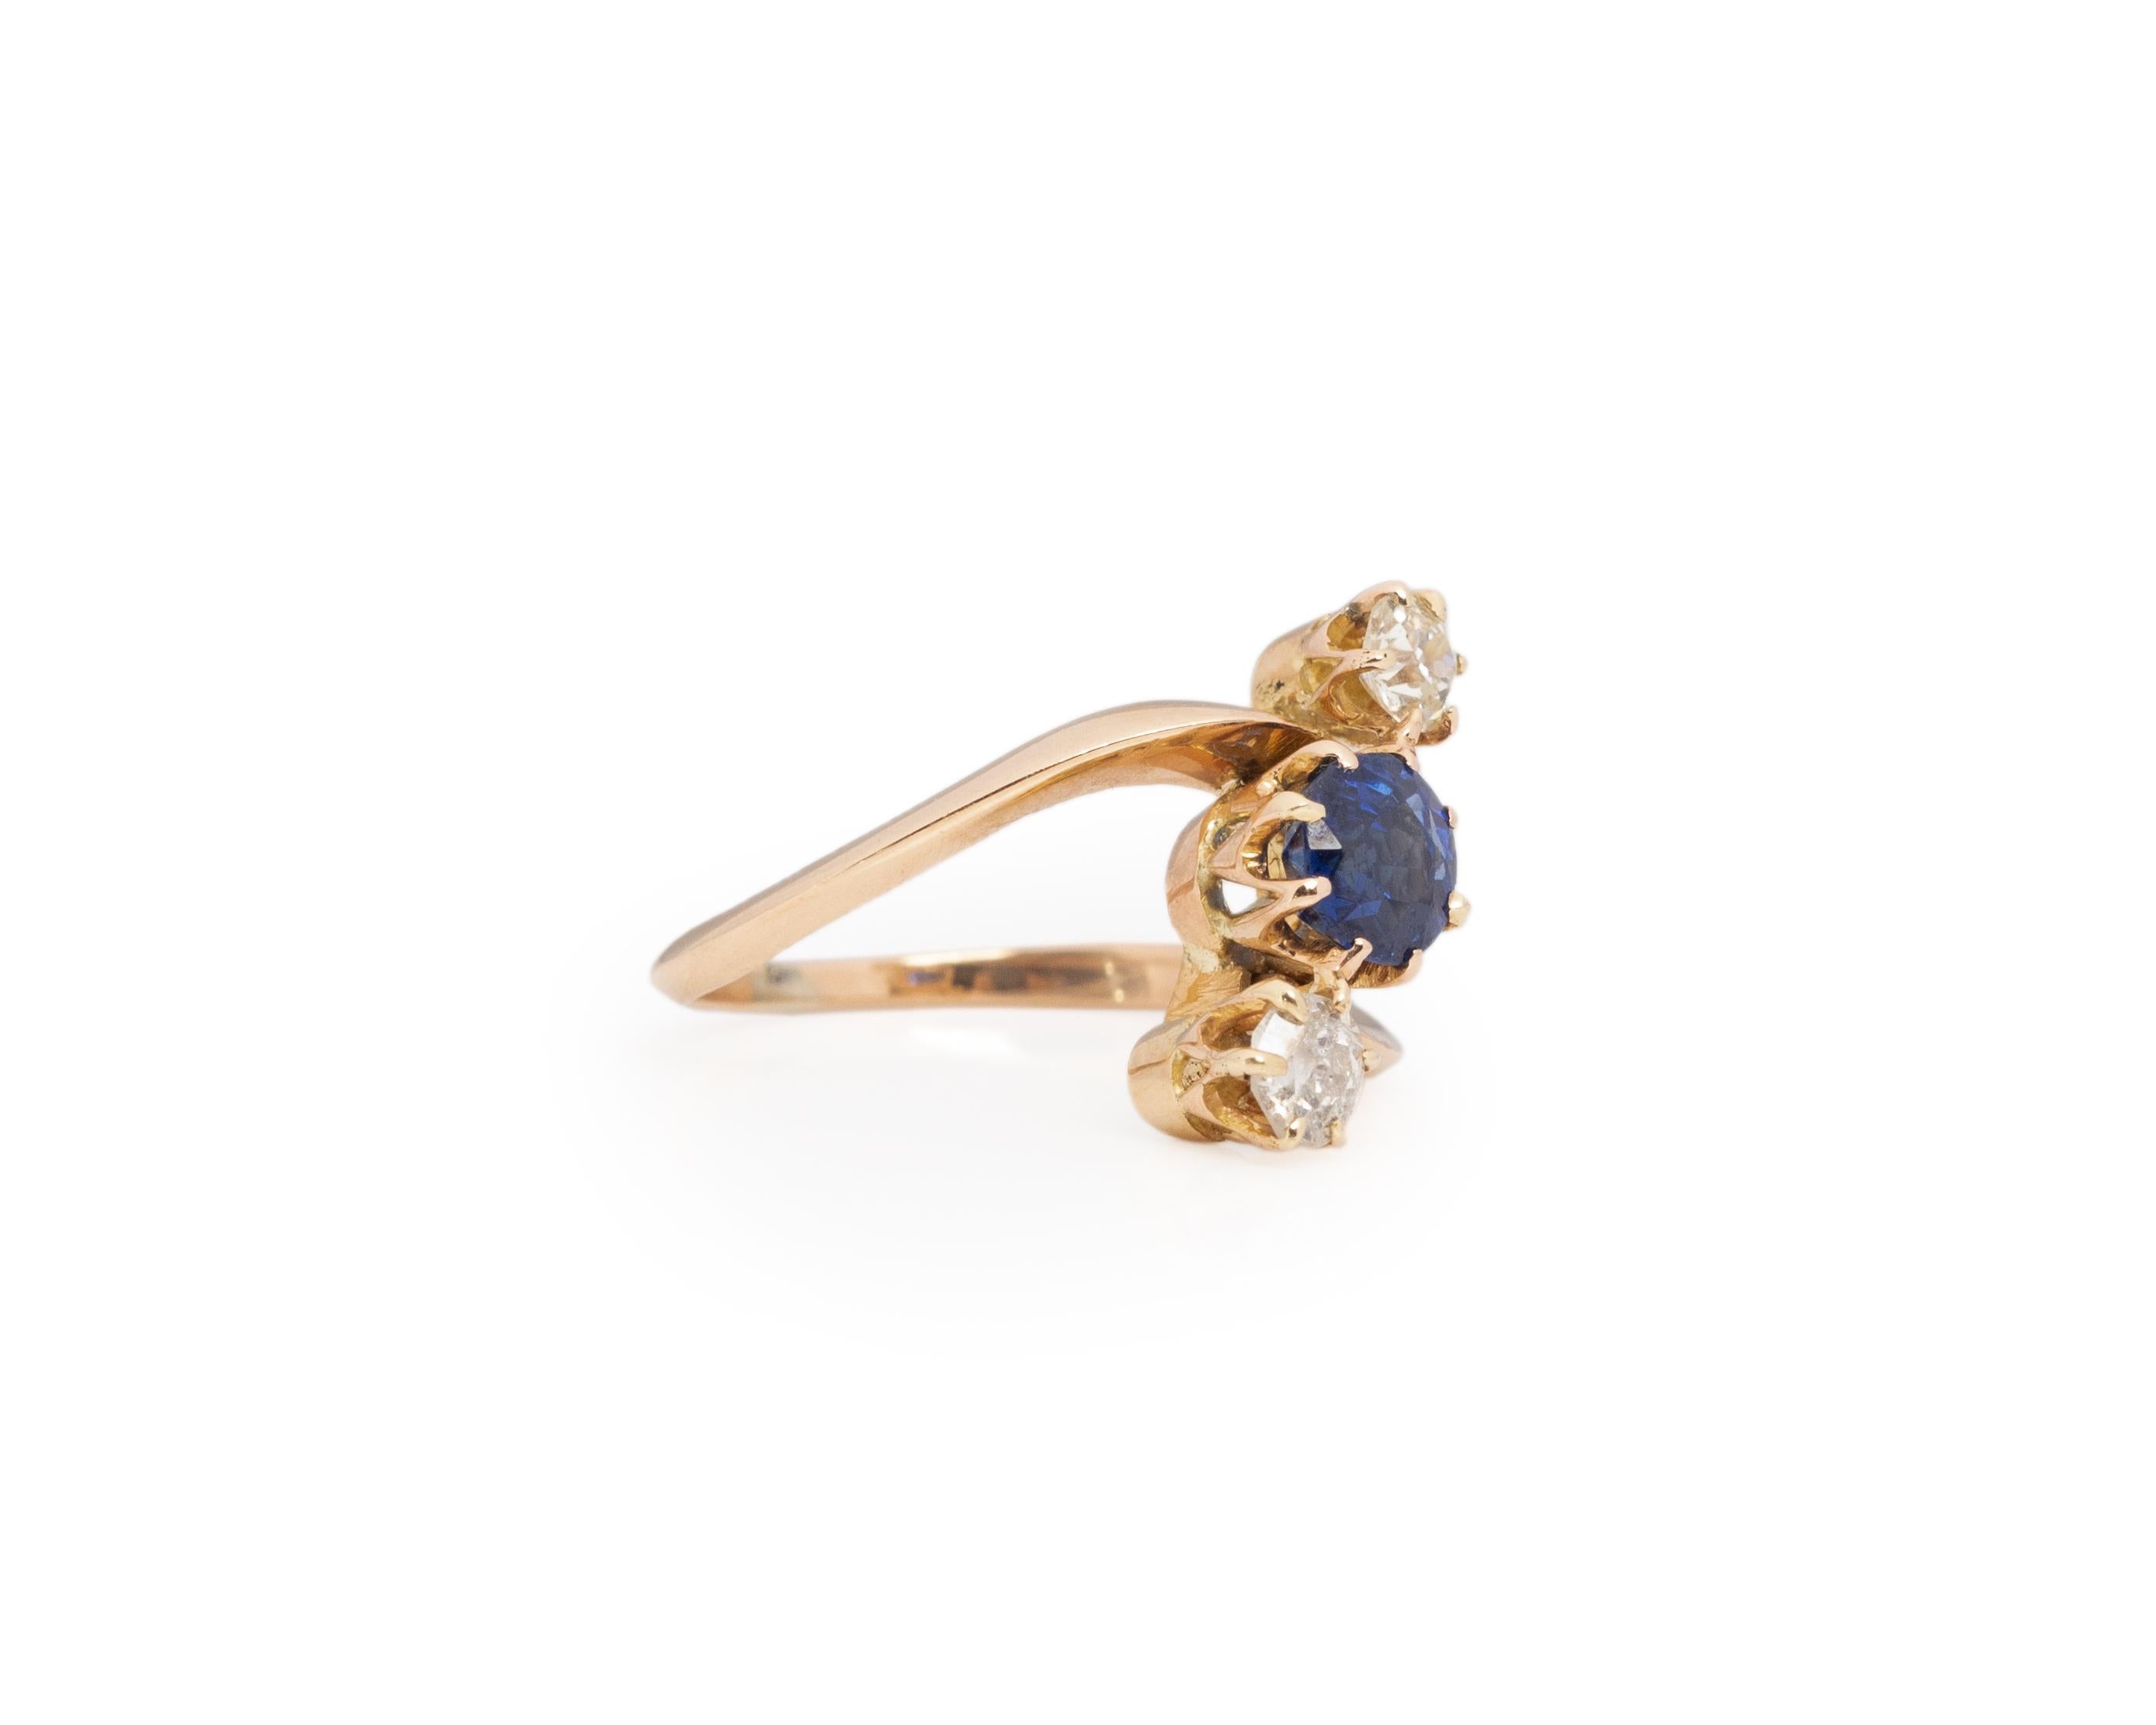 Ring Size: 4.25
Metal Type: 14K Yellow Gold [Hallmarked, and Tested]
Weight: 2.6 grams

Diamond Details:
Weight: .40ct
Cut: Old European brilliant
Color: J
Clarity: VS

Sapphire Details:
Weight: .65ct, total
Cut: Old European brilliant
Color: